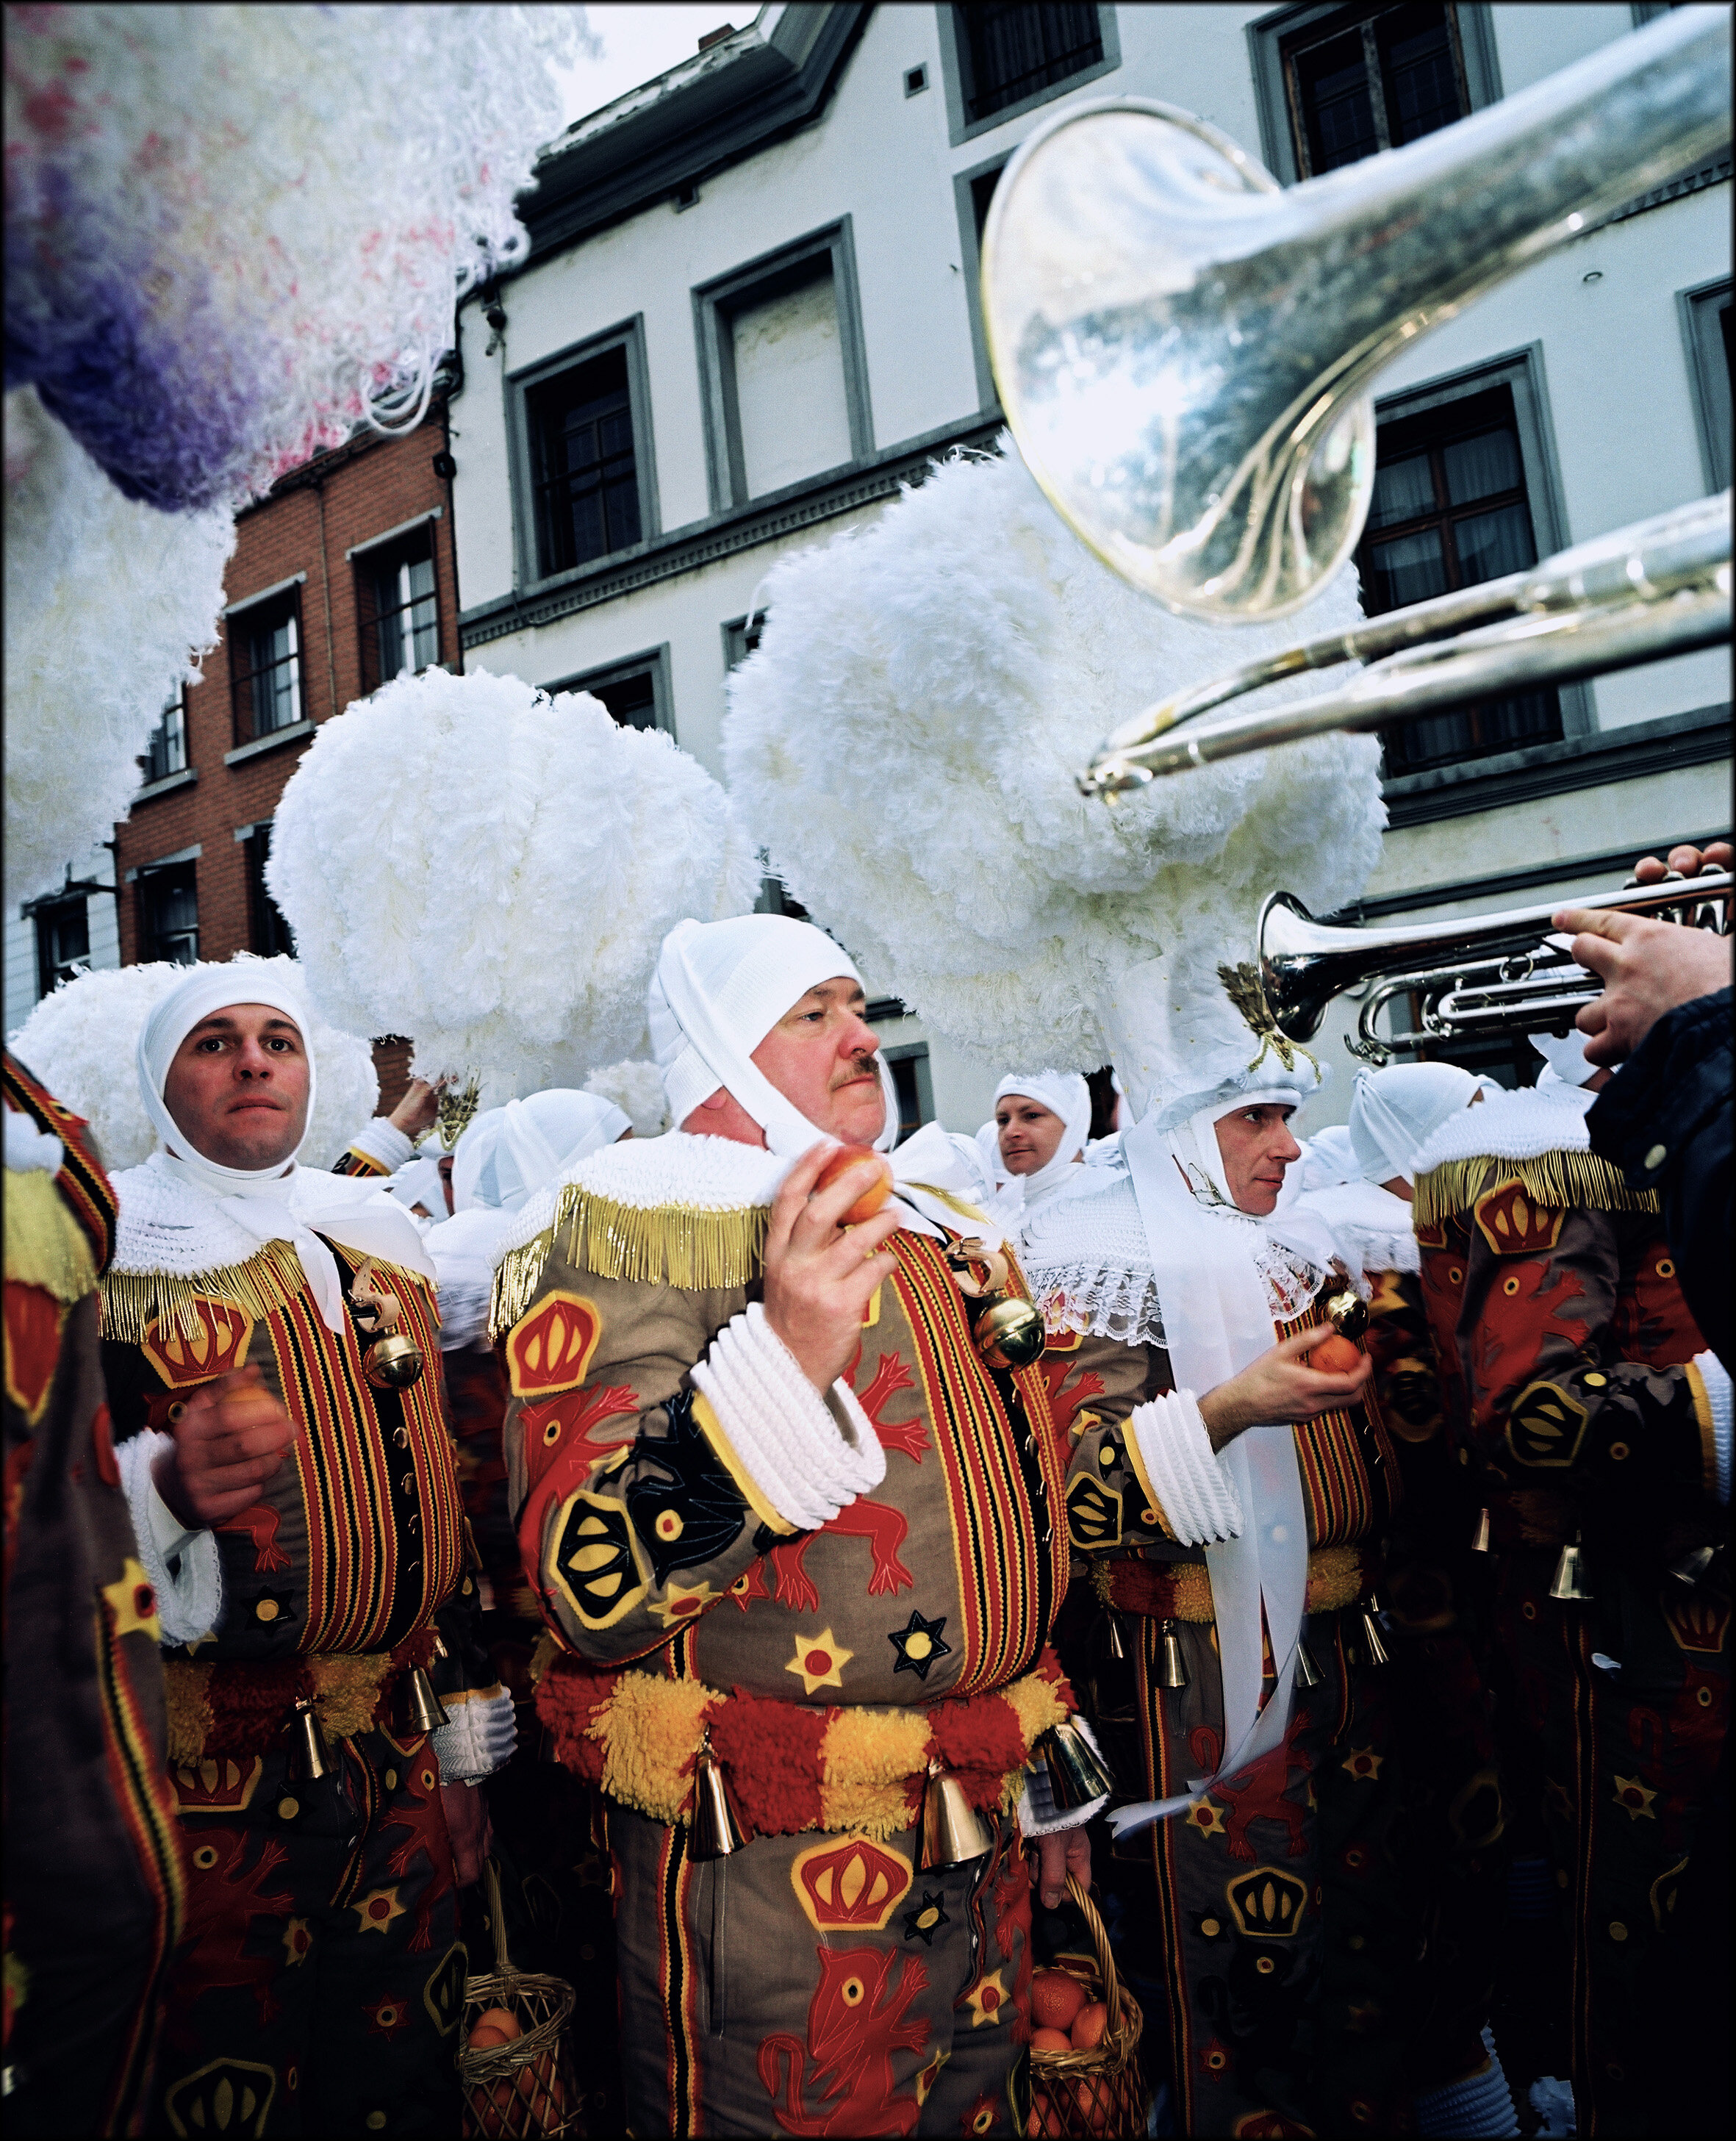  During the Shrove Tuesday’s afternoon procession in the city of Binche, the Gille wears his ostrich feathers hat and trows oranges 